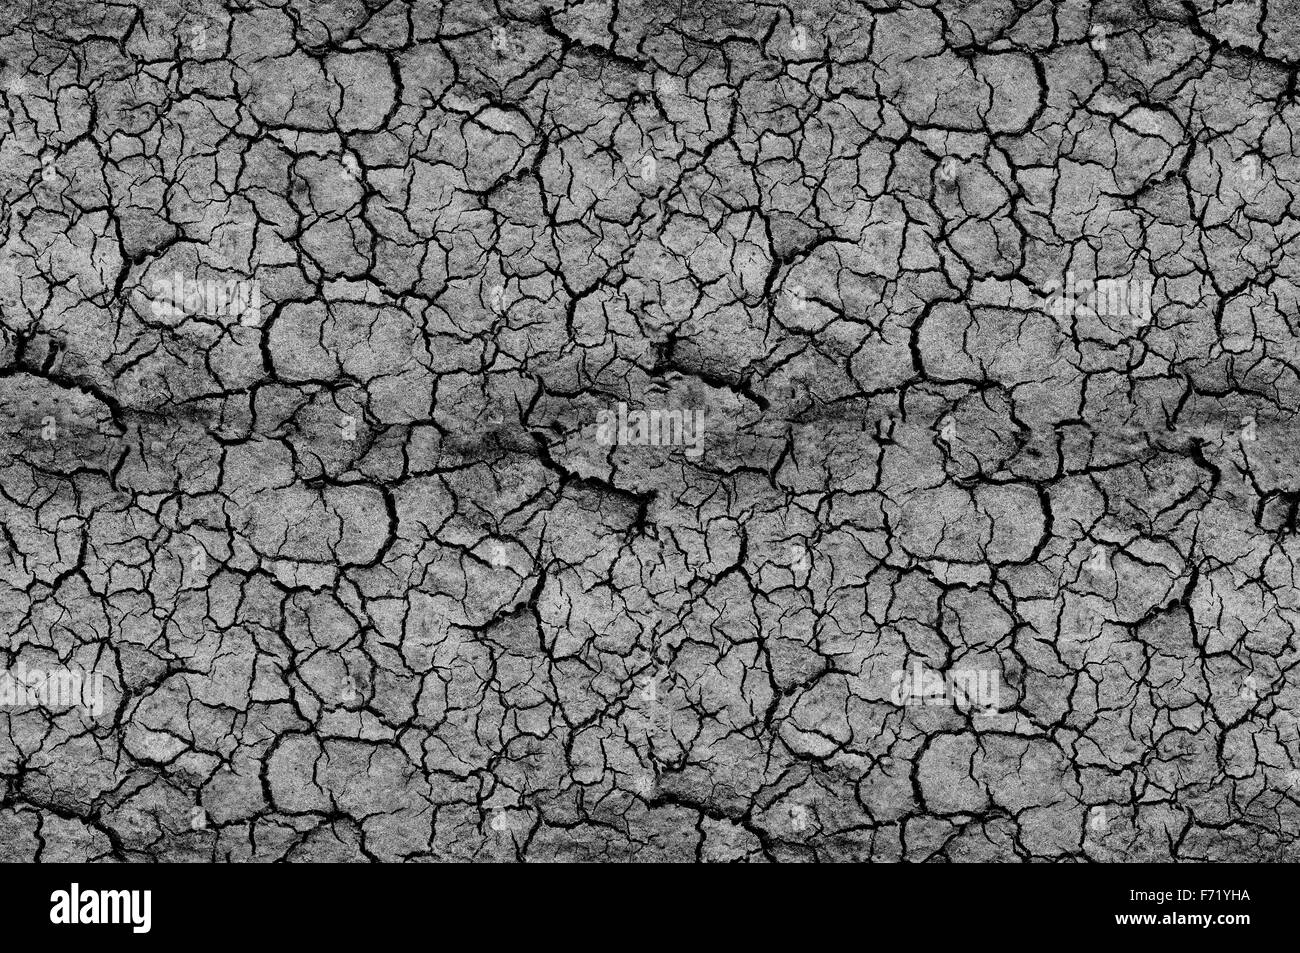 abstract background. cracked, gray surface Stock Photo